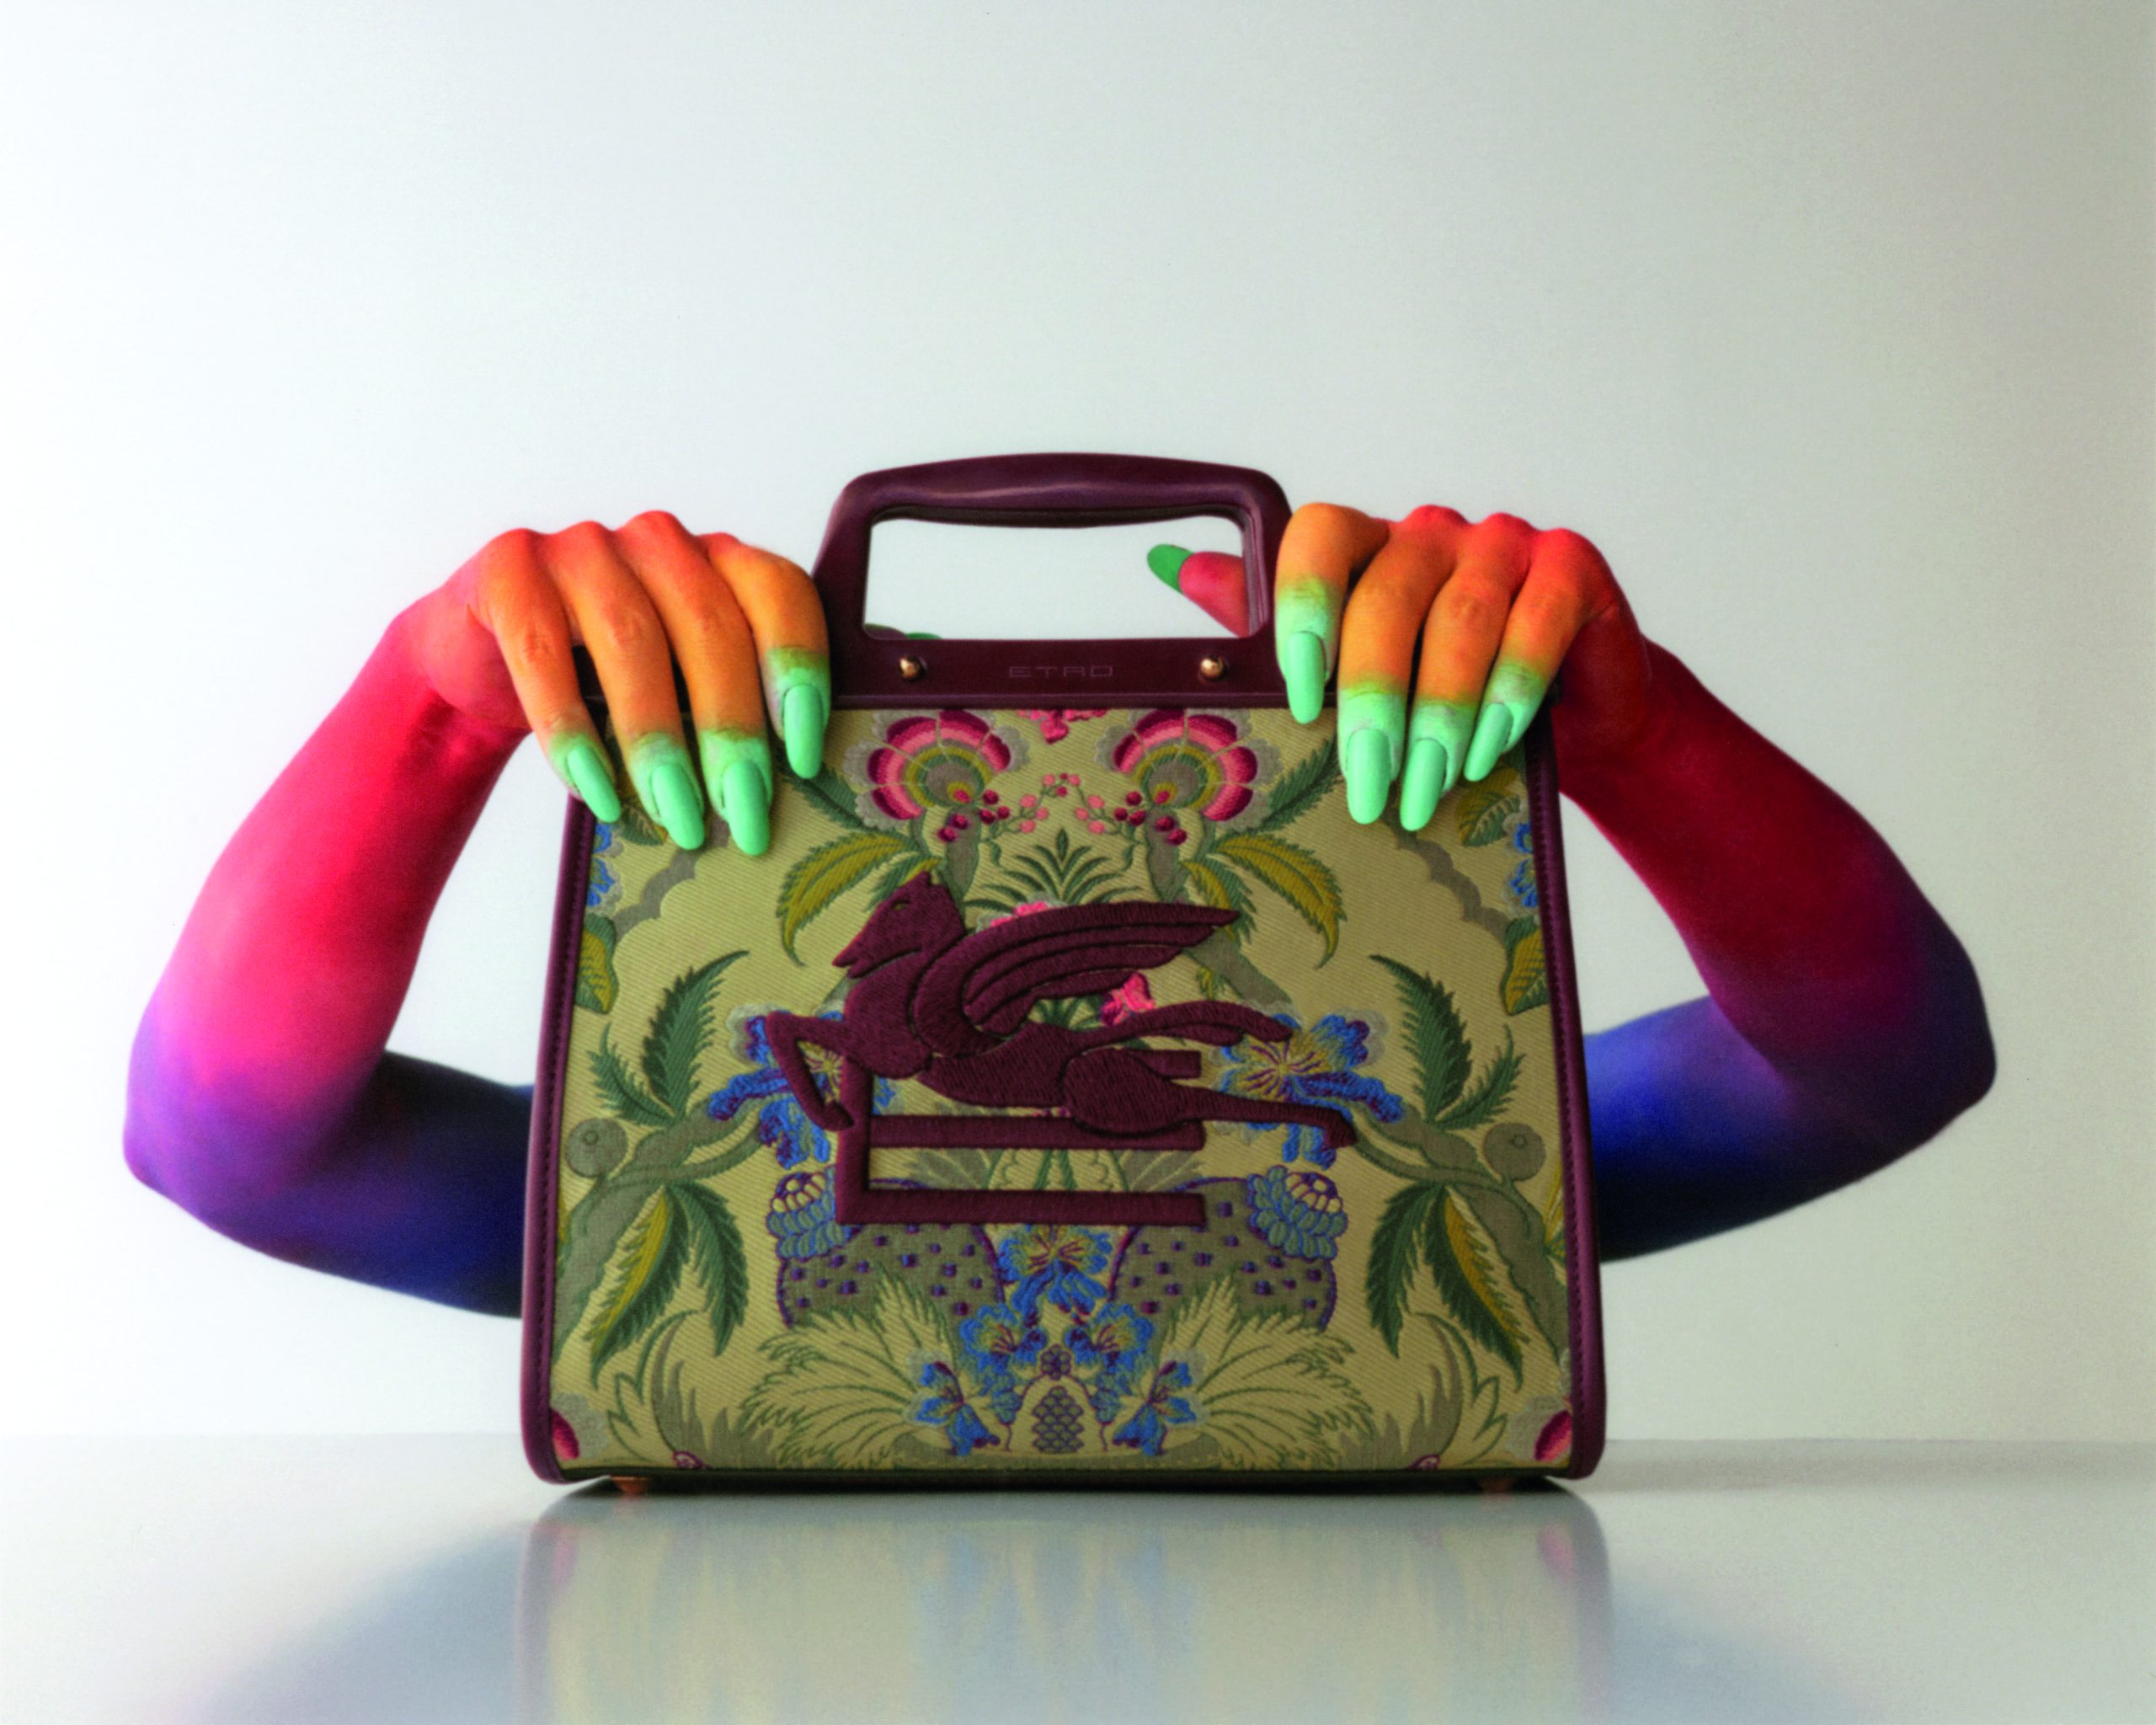 Etro introduces the Vela bag, a new handbag with instantly